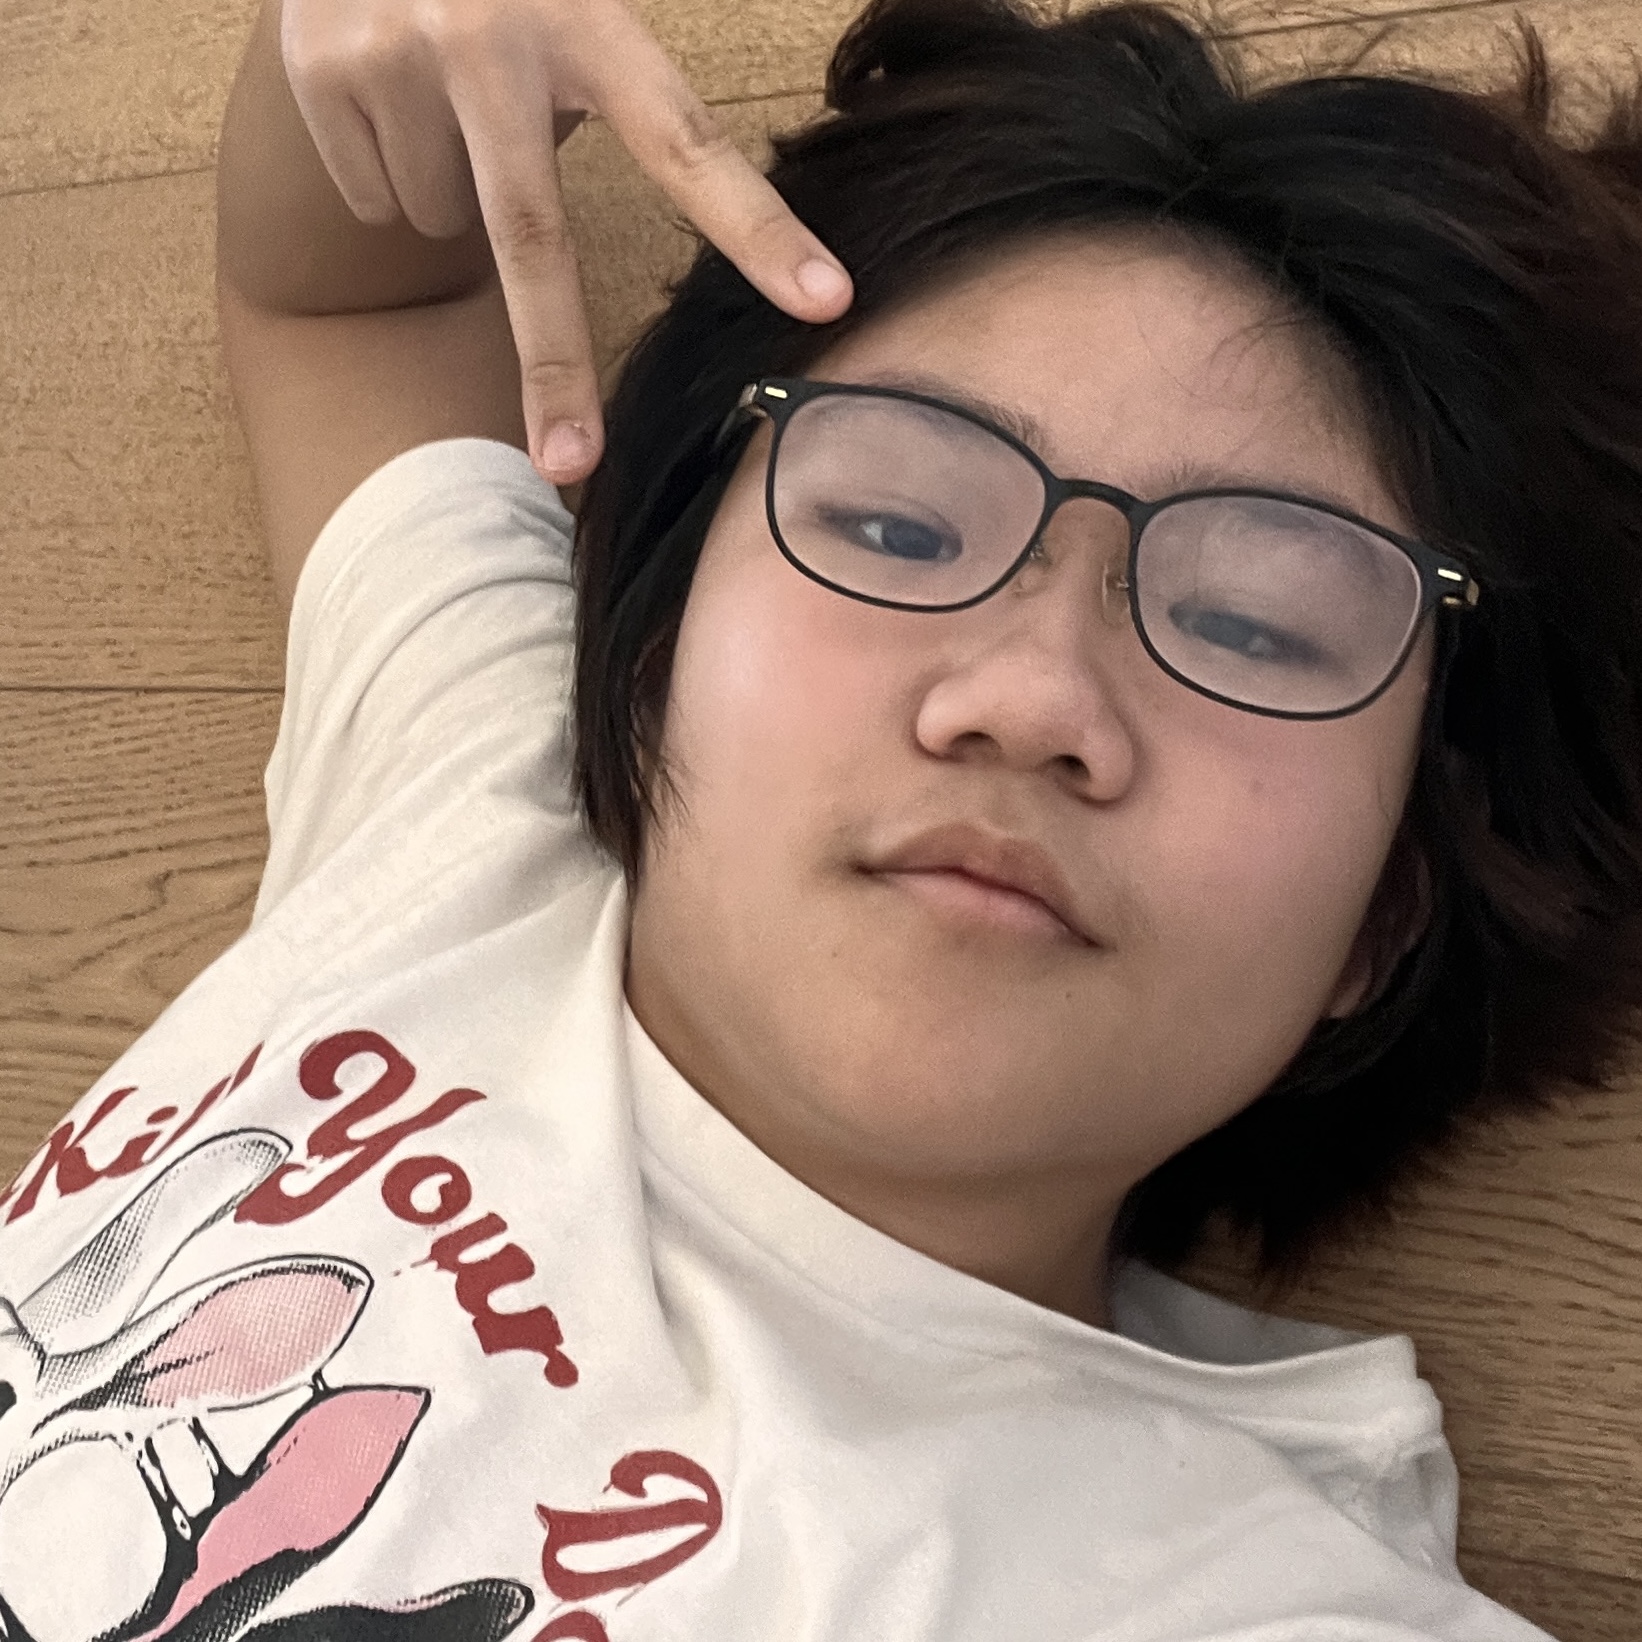 Selfie of an Asian teenager taken from a low angle. He has on glasses, and a T-shirt that says <...> 'your d', with a white rabbit and a matching black rabbit. He has black hair with brown ends, and is smiling at the camera, making a peace sign. He is lying on the floor.